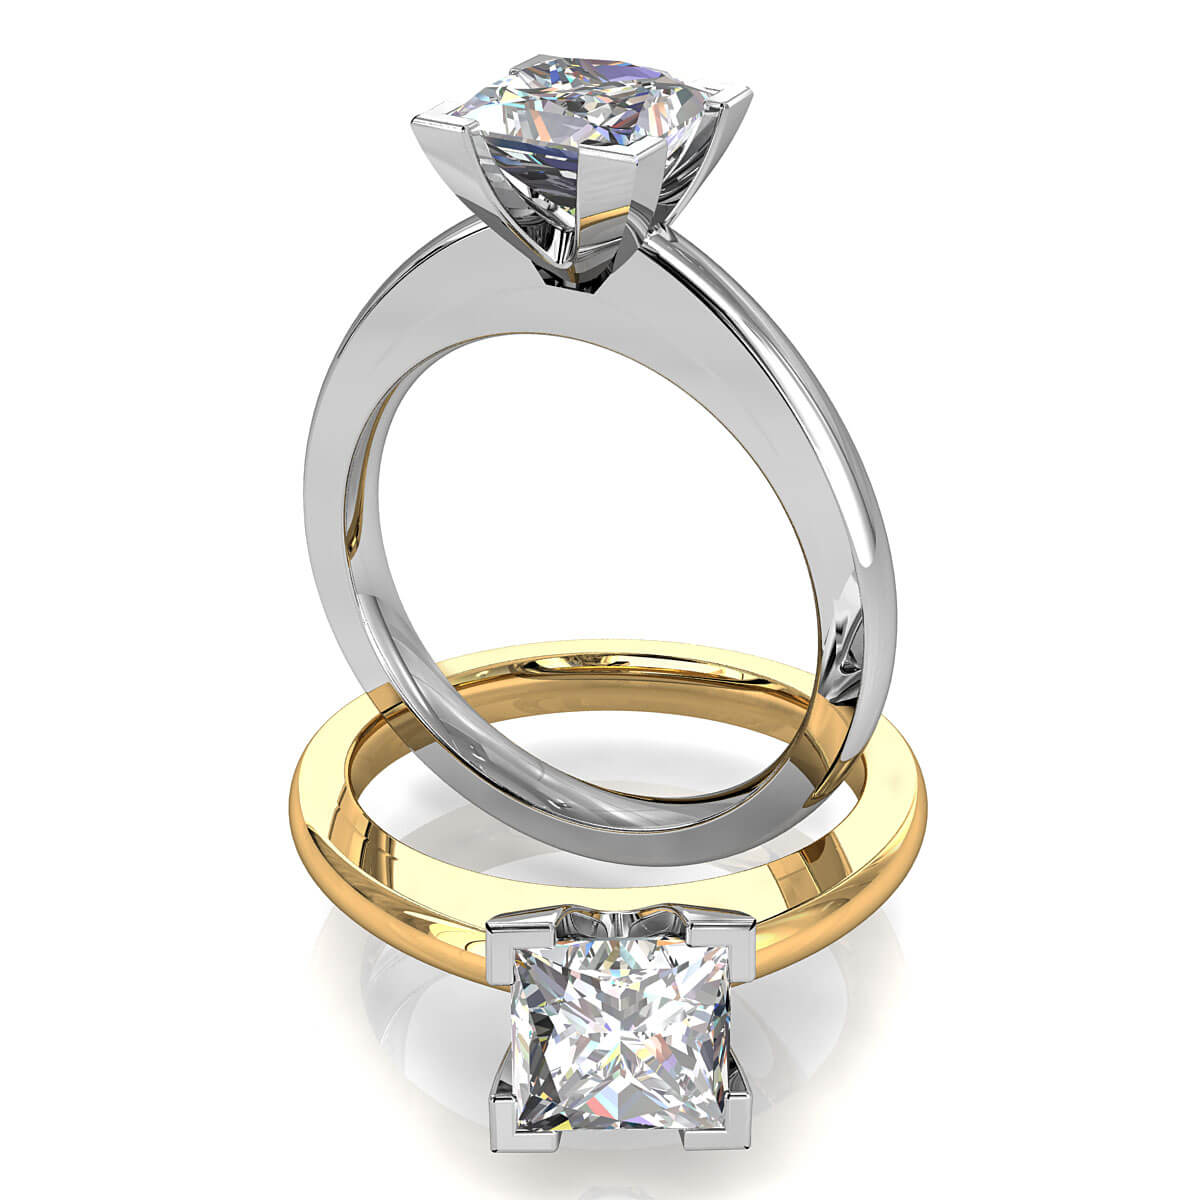 Princess Cut Solitaire Diamond Engagement Ring, 4 Corner Claws on a Flat Band.